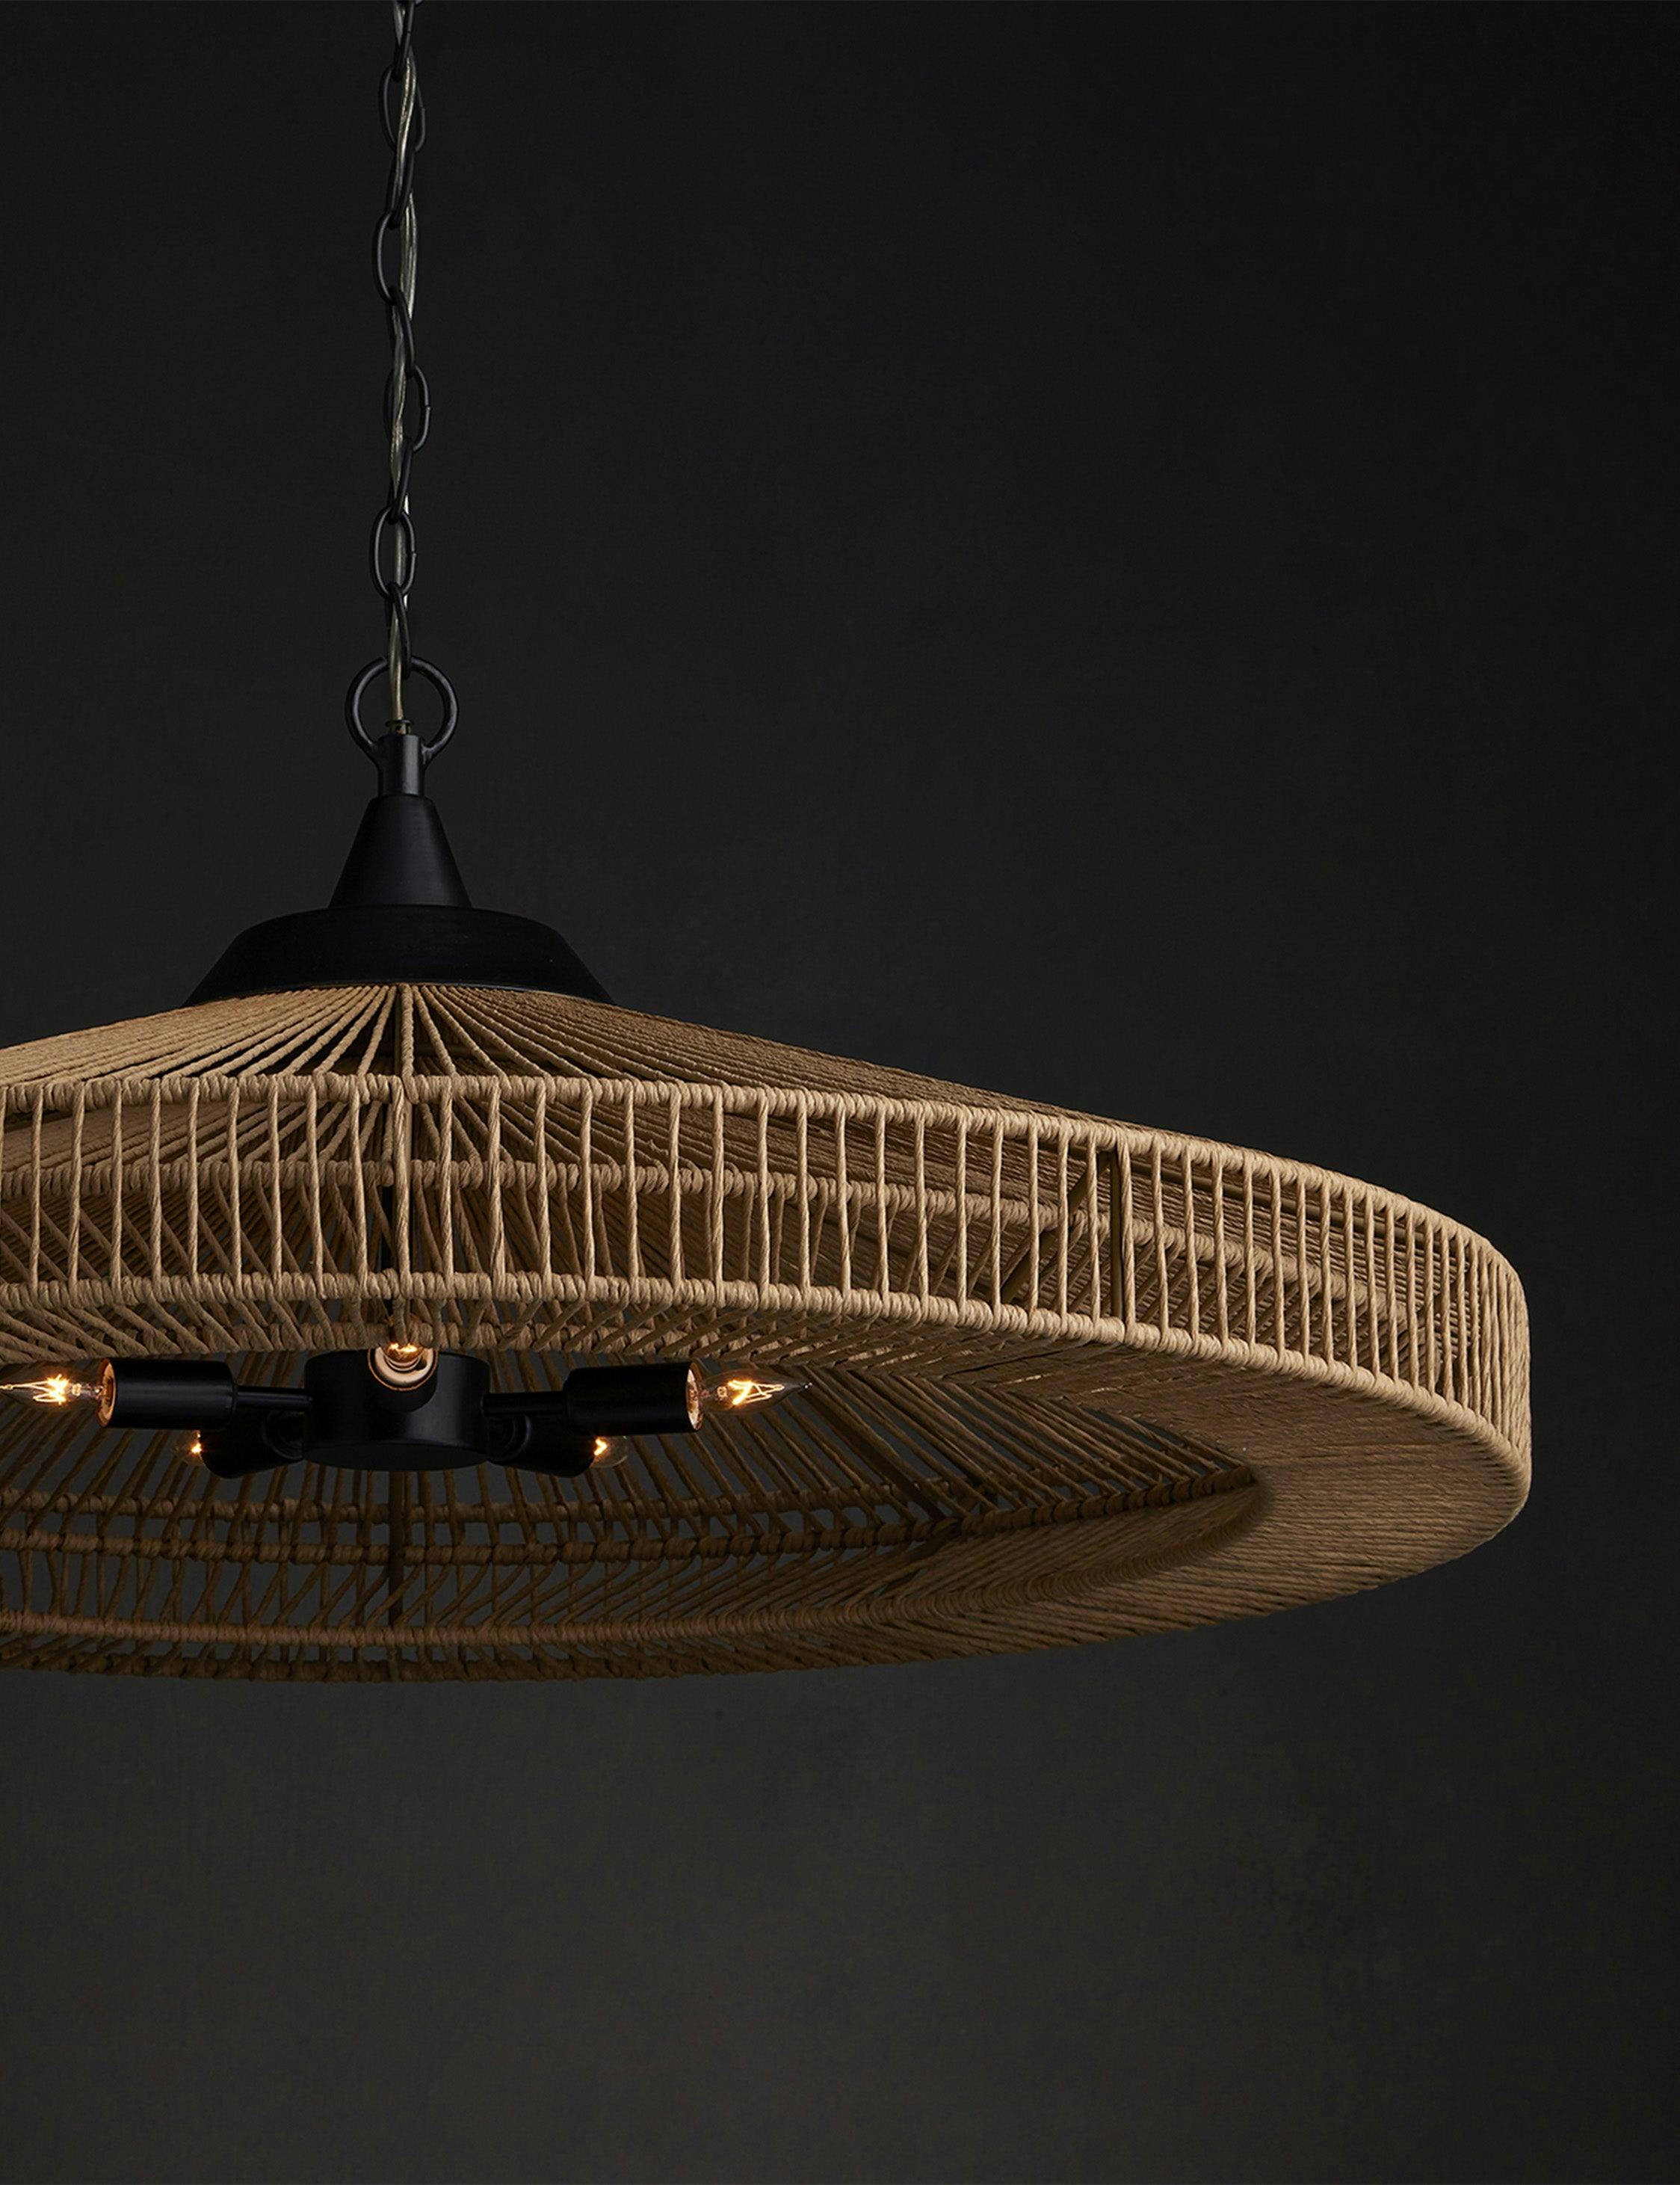 Satin Black Cage Chandelier with Artisanal Woven Frame - 5 Lights